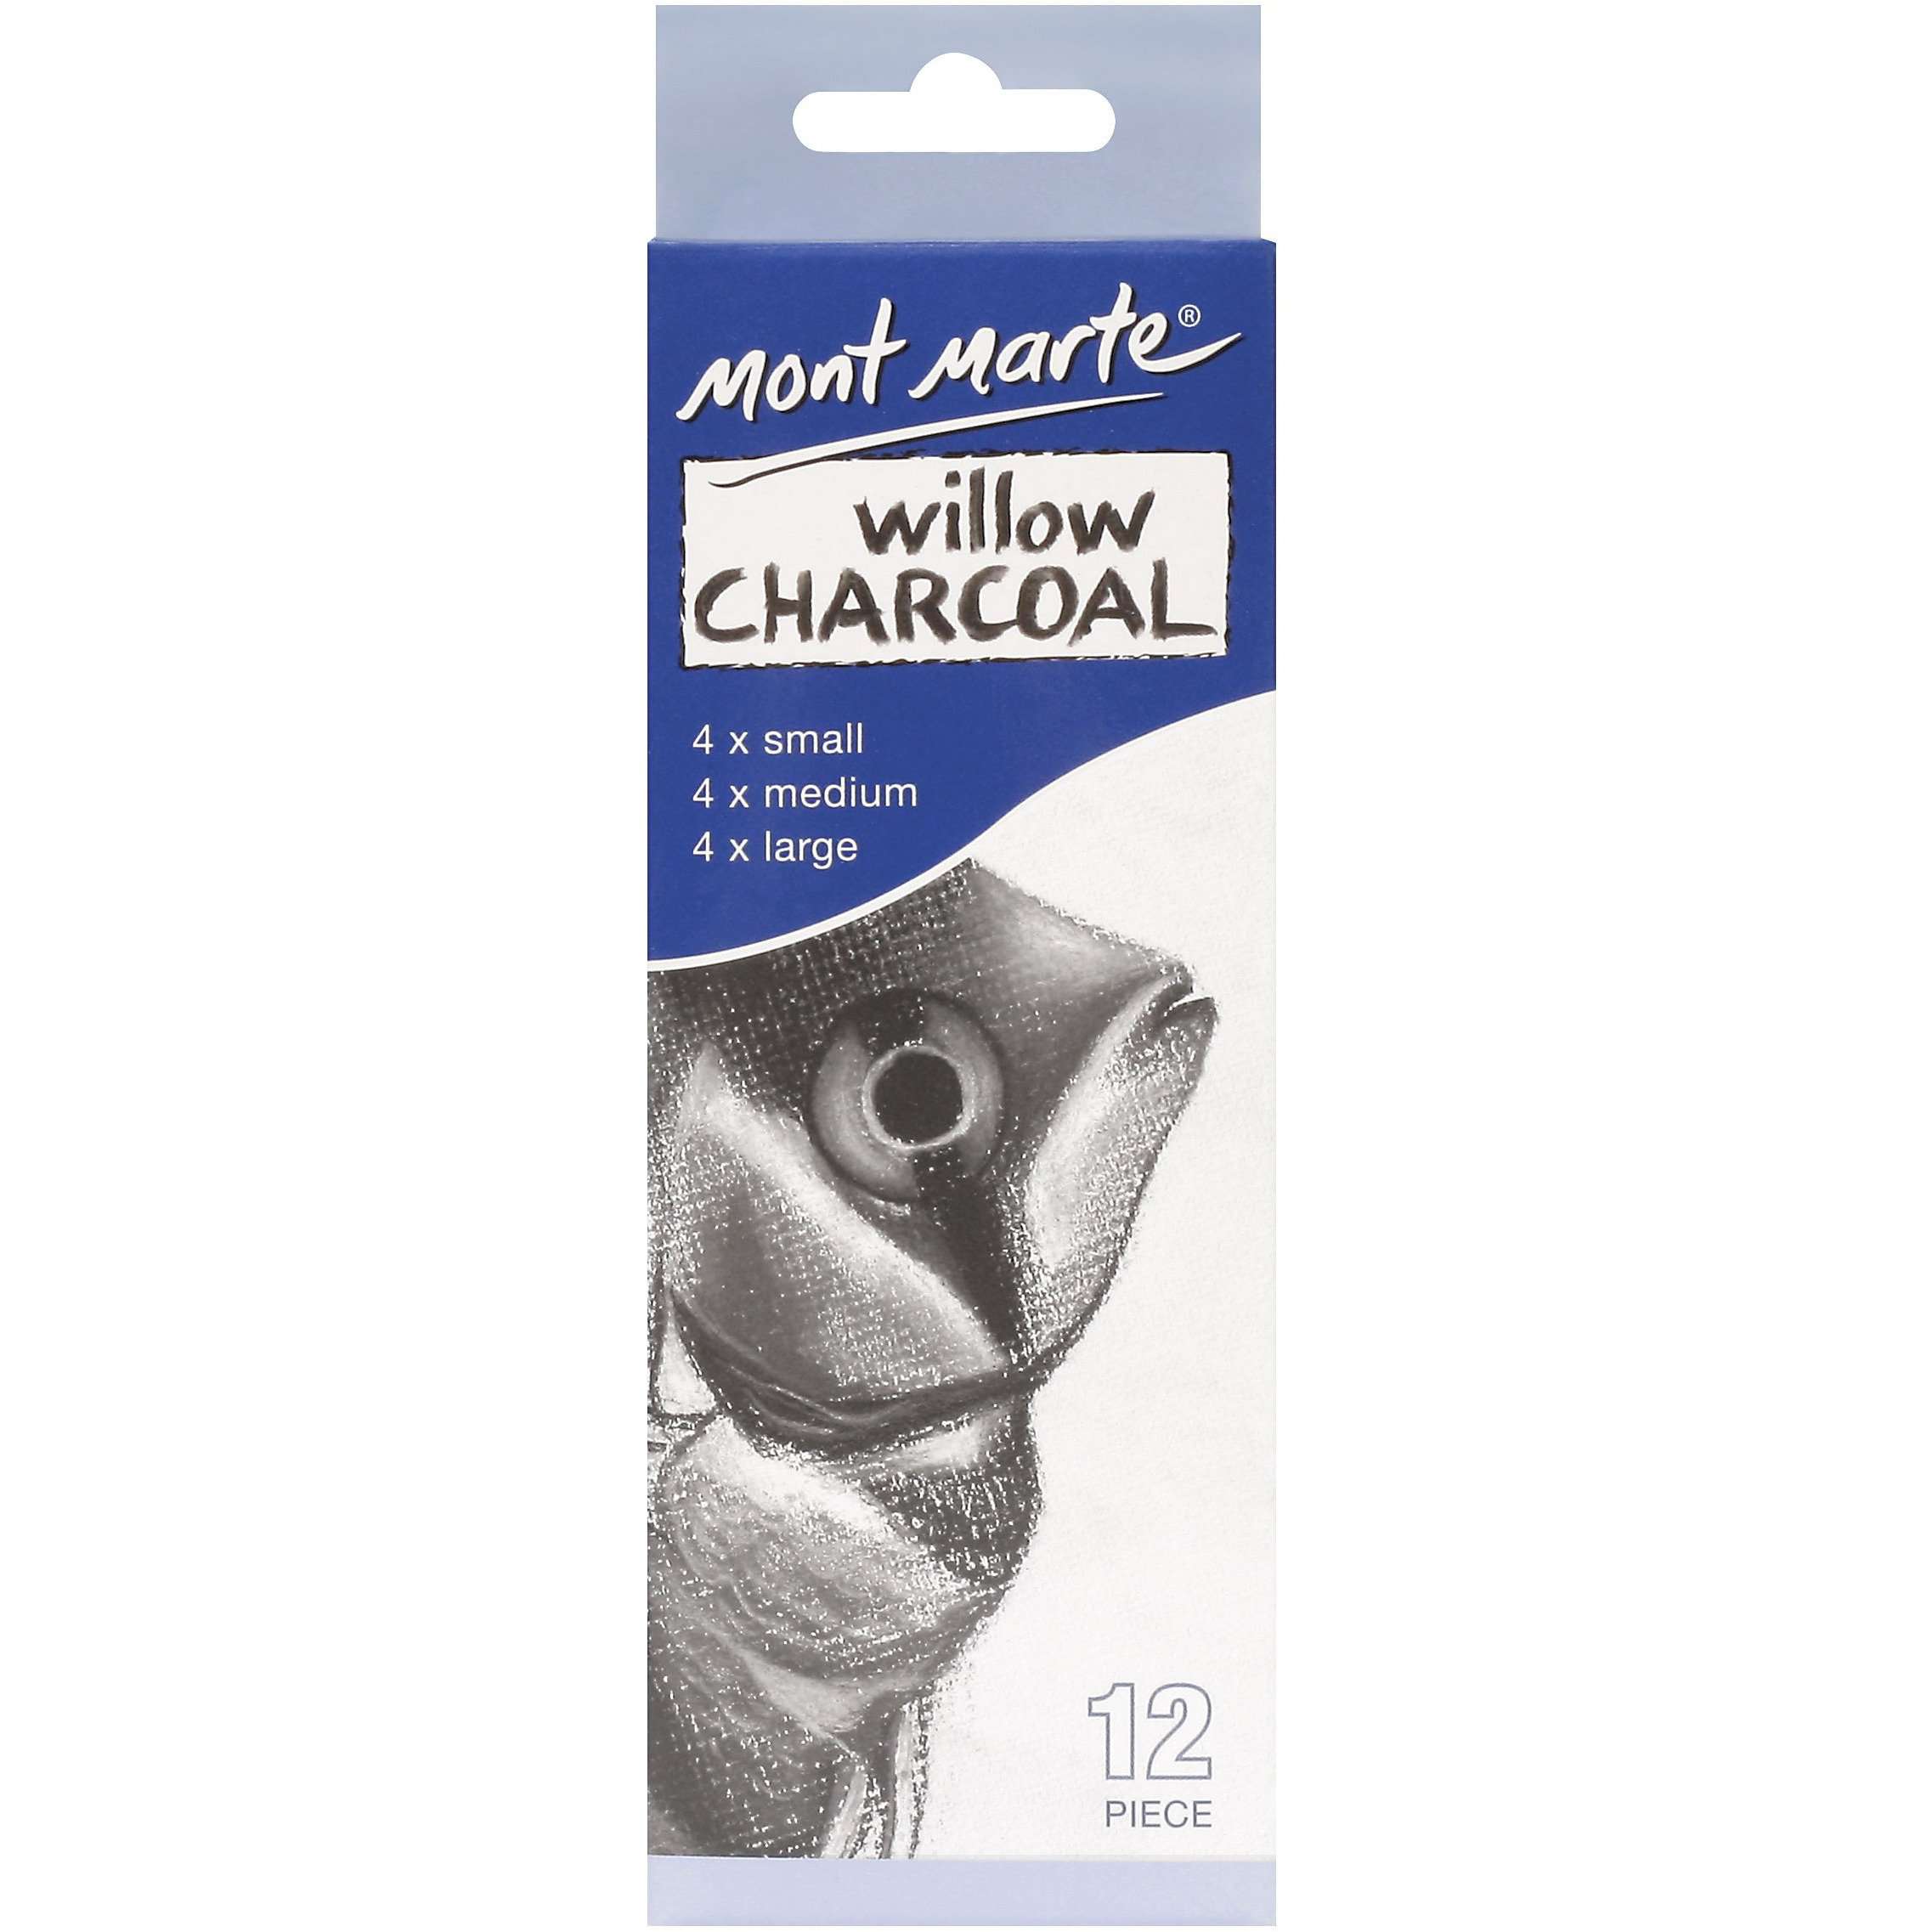 Buy onilne Mont Marte Willow Charcoal Assorted Sizes 12 Pack | Dollars and Sense cheap and low prices in australia